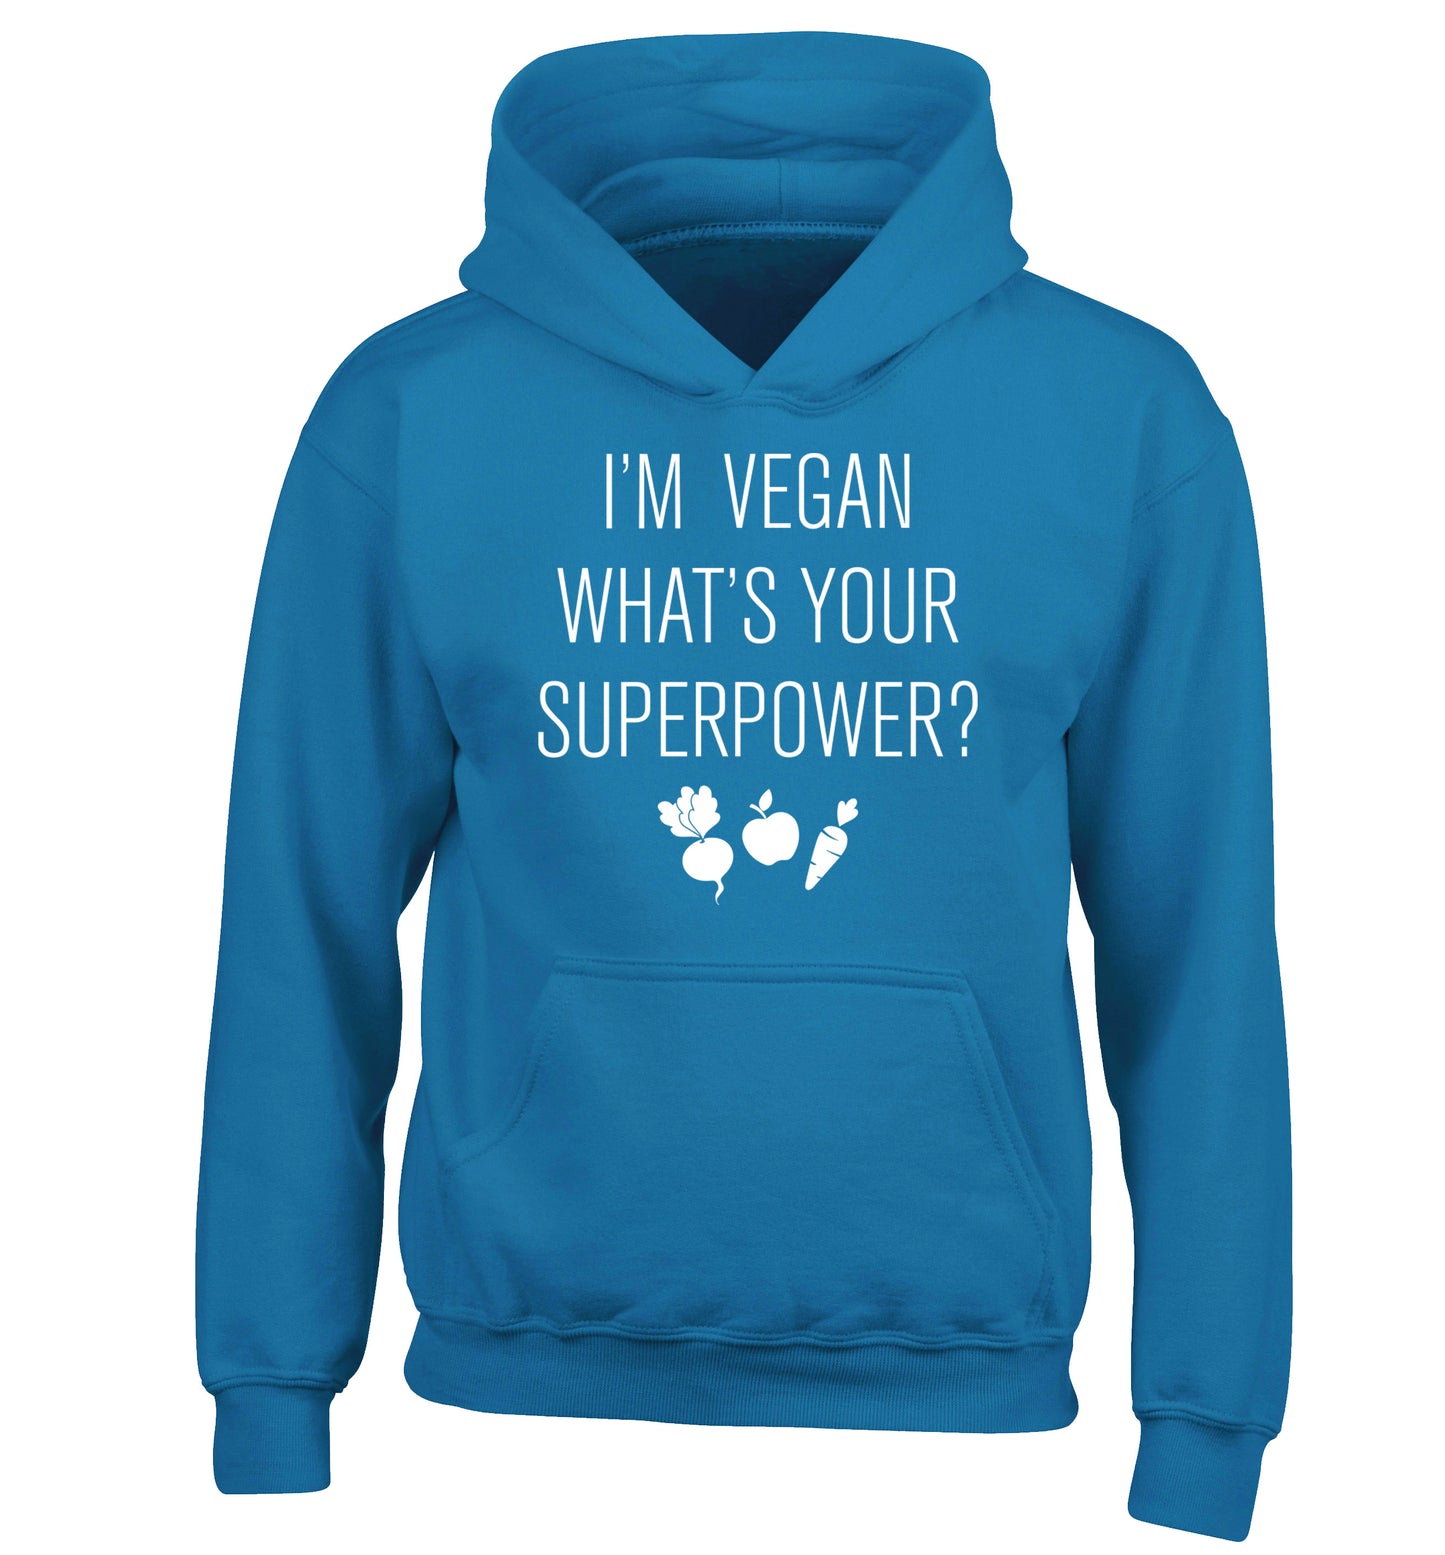 I'm Vegan What's Your Superpower? children's blue hoodie 12-13 Years